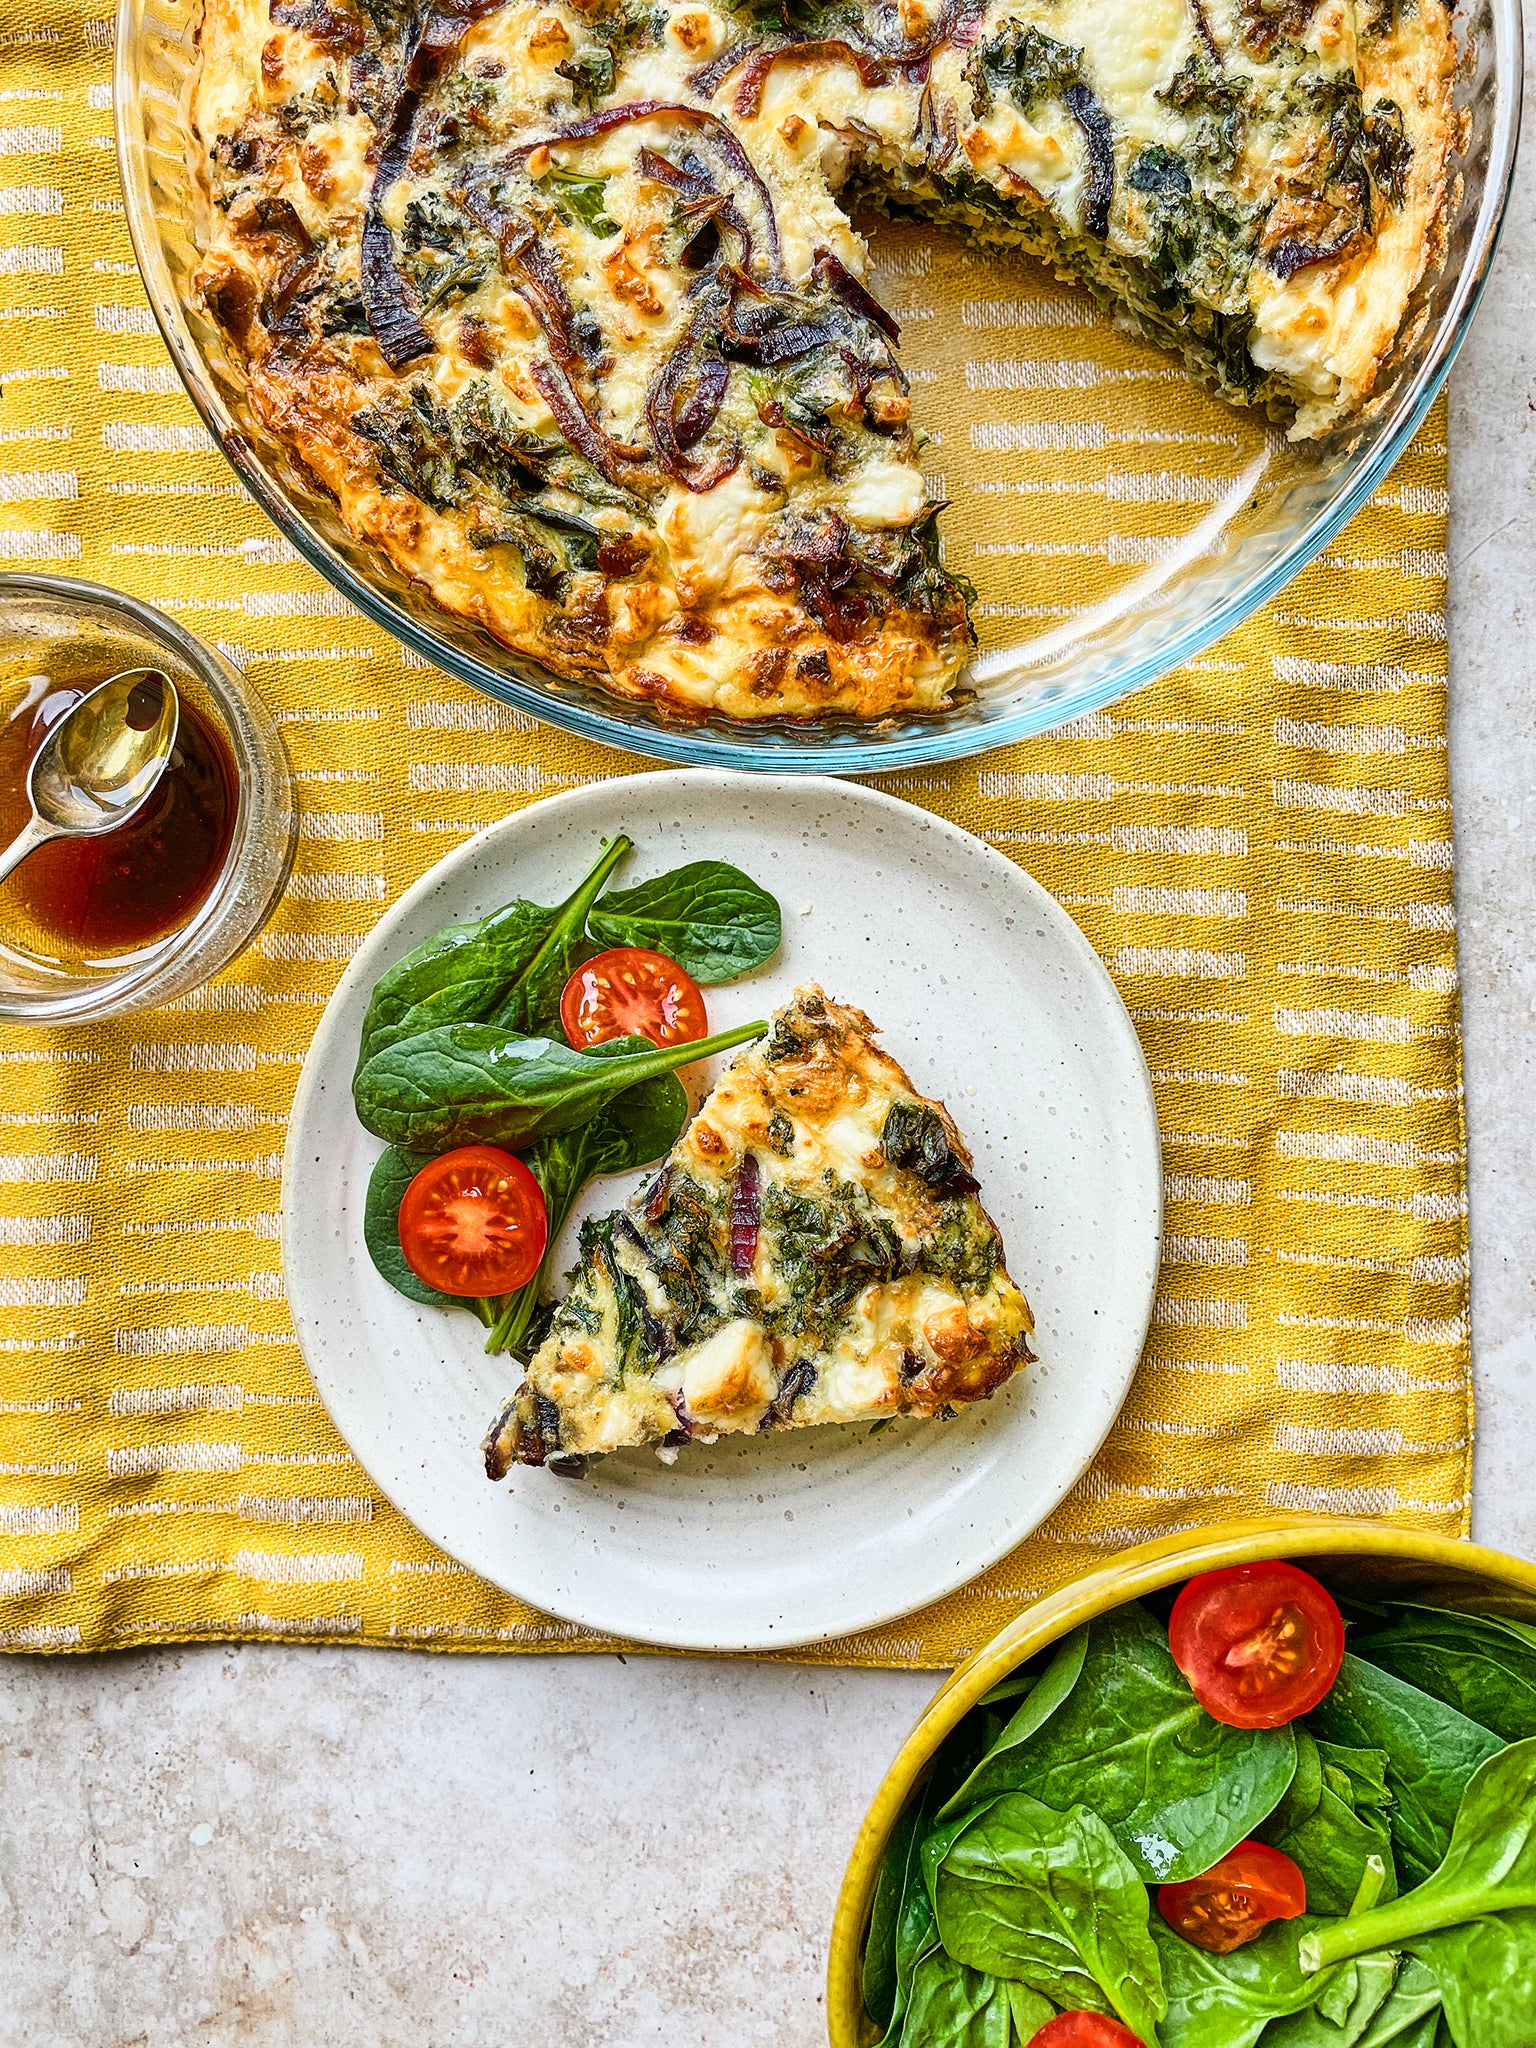 Crustless kale quiche can be made ahead of time and is a hit at picnics.